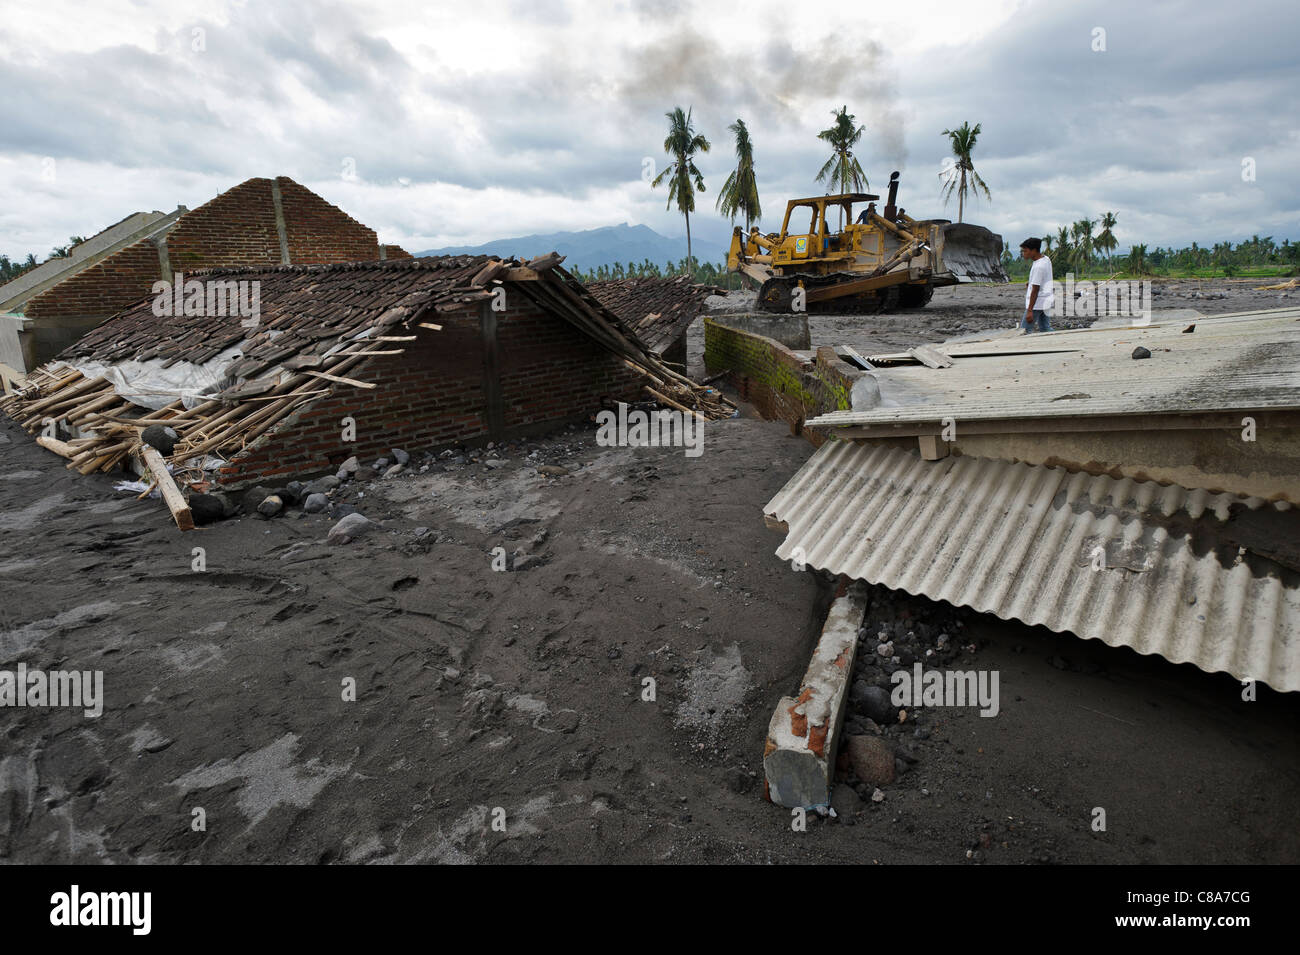 A village badly damaged by a lahar mud flow in March 2011, Sirahan, Magelang, Yogyakarta, Java, Indonesia. Stock Photo